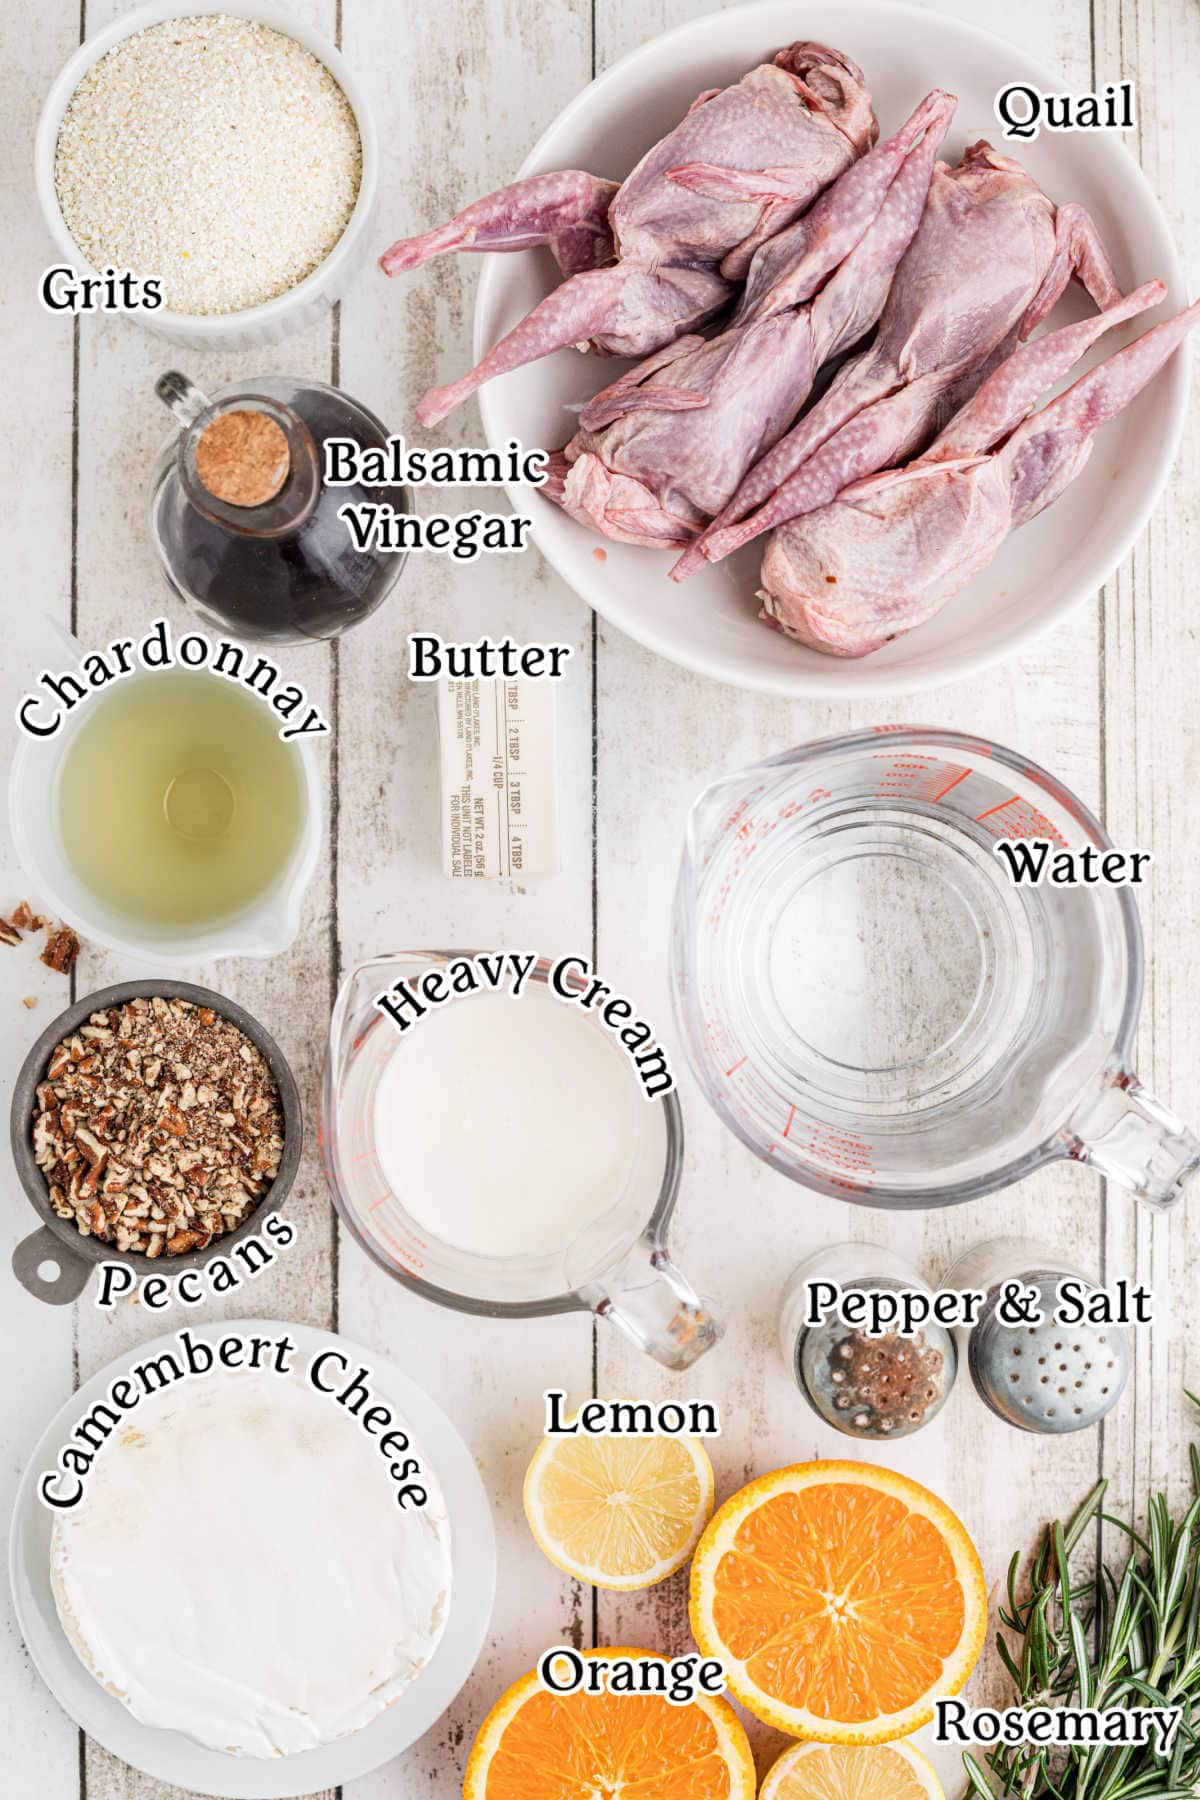 Labeled ingredients for roasted quail with cheese grits.